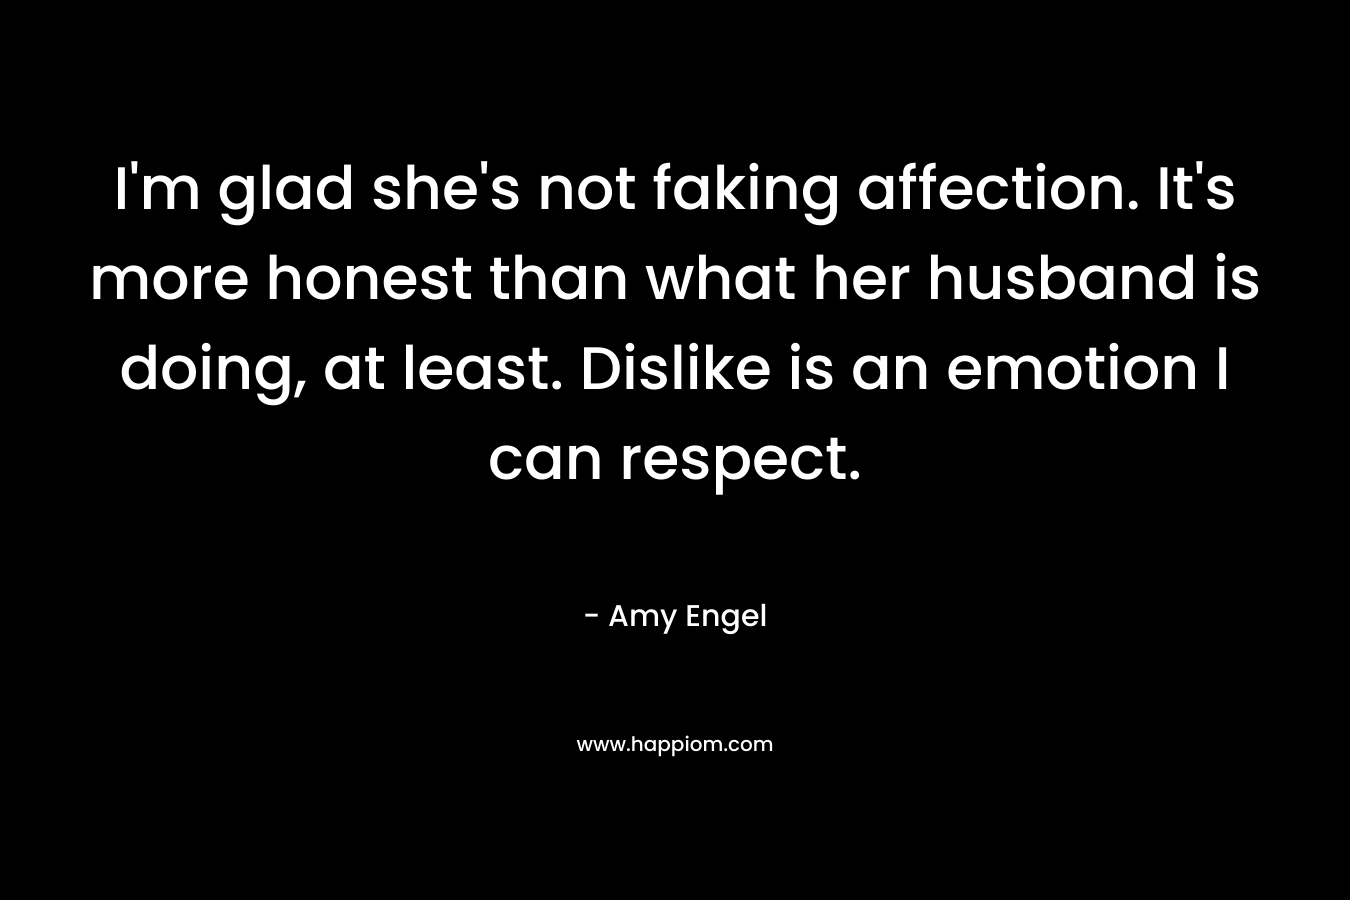 I’m glad she’s not faking affection. It’s more honest than what her husband is doing, at least. Dislike is an emotion I can respect. – Amy Engel